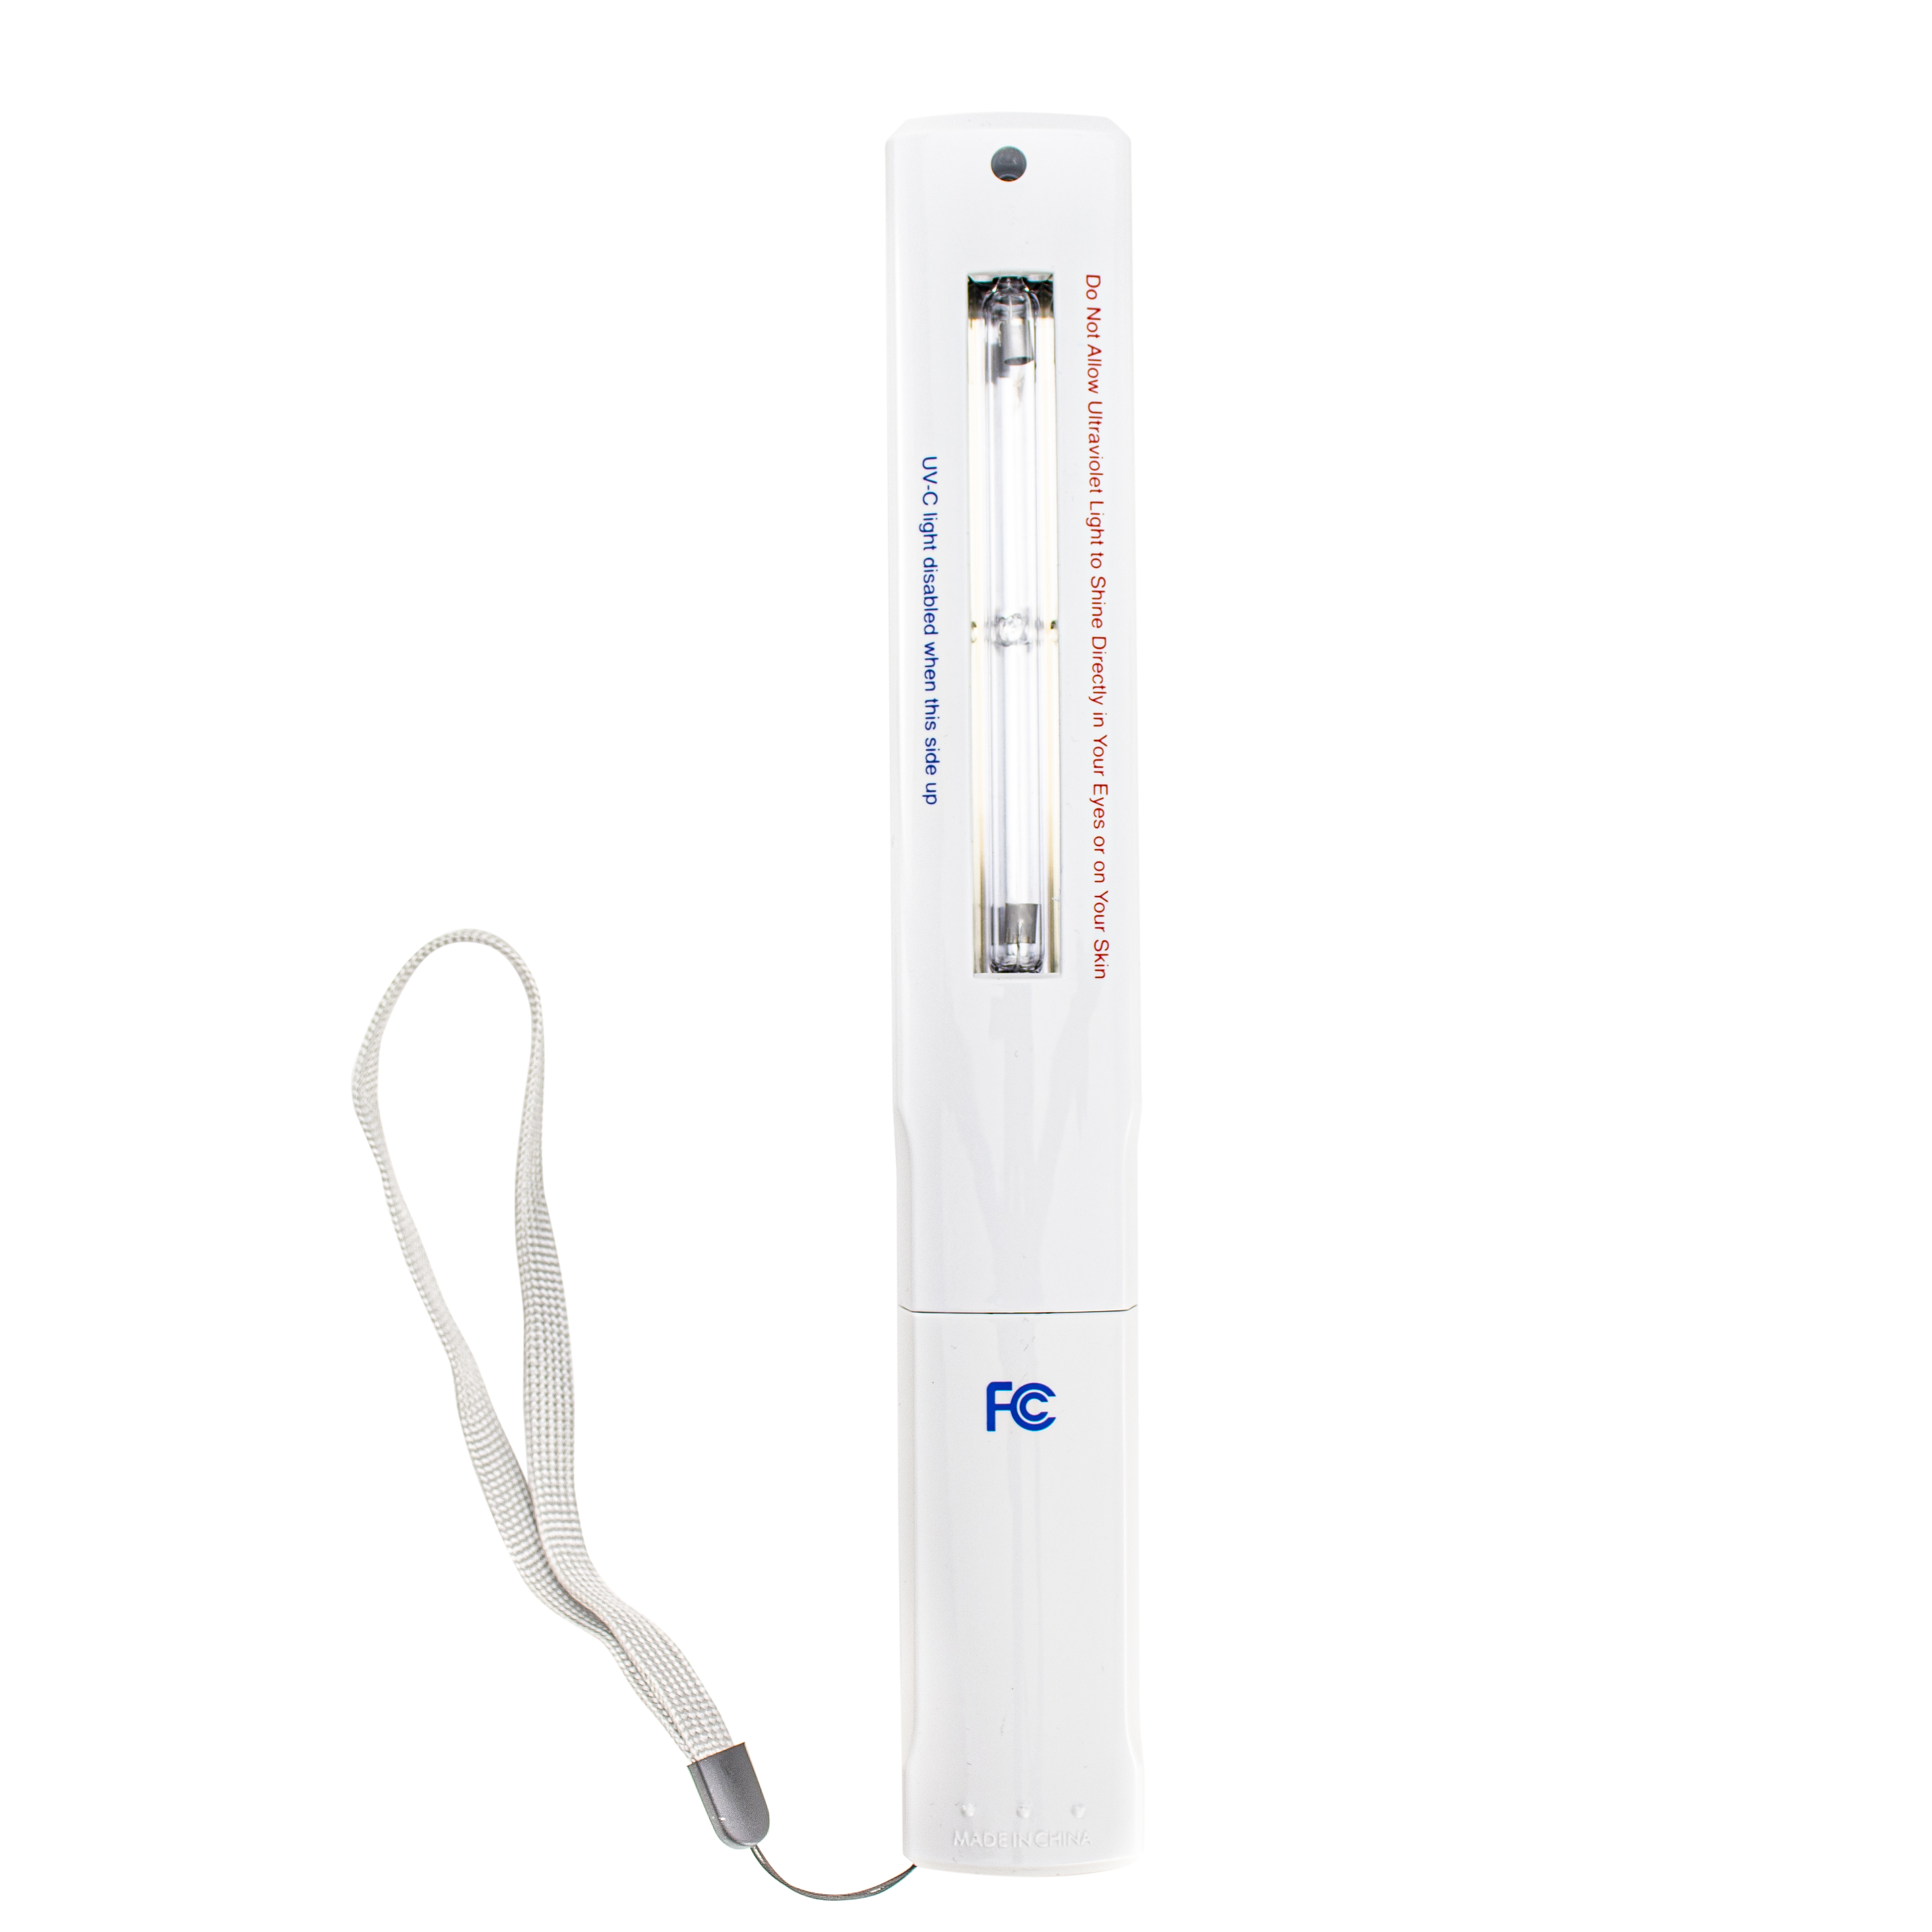 Verilux CleanWave Portable Sanitizing Travel Wand with UV-C Technology - image 3 of 6